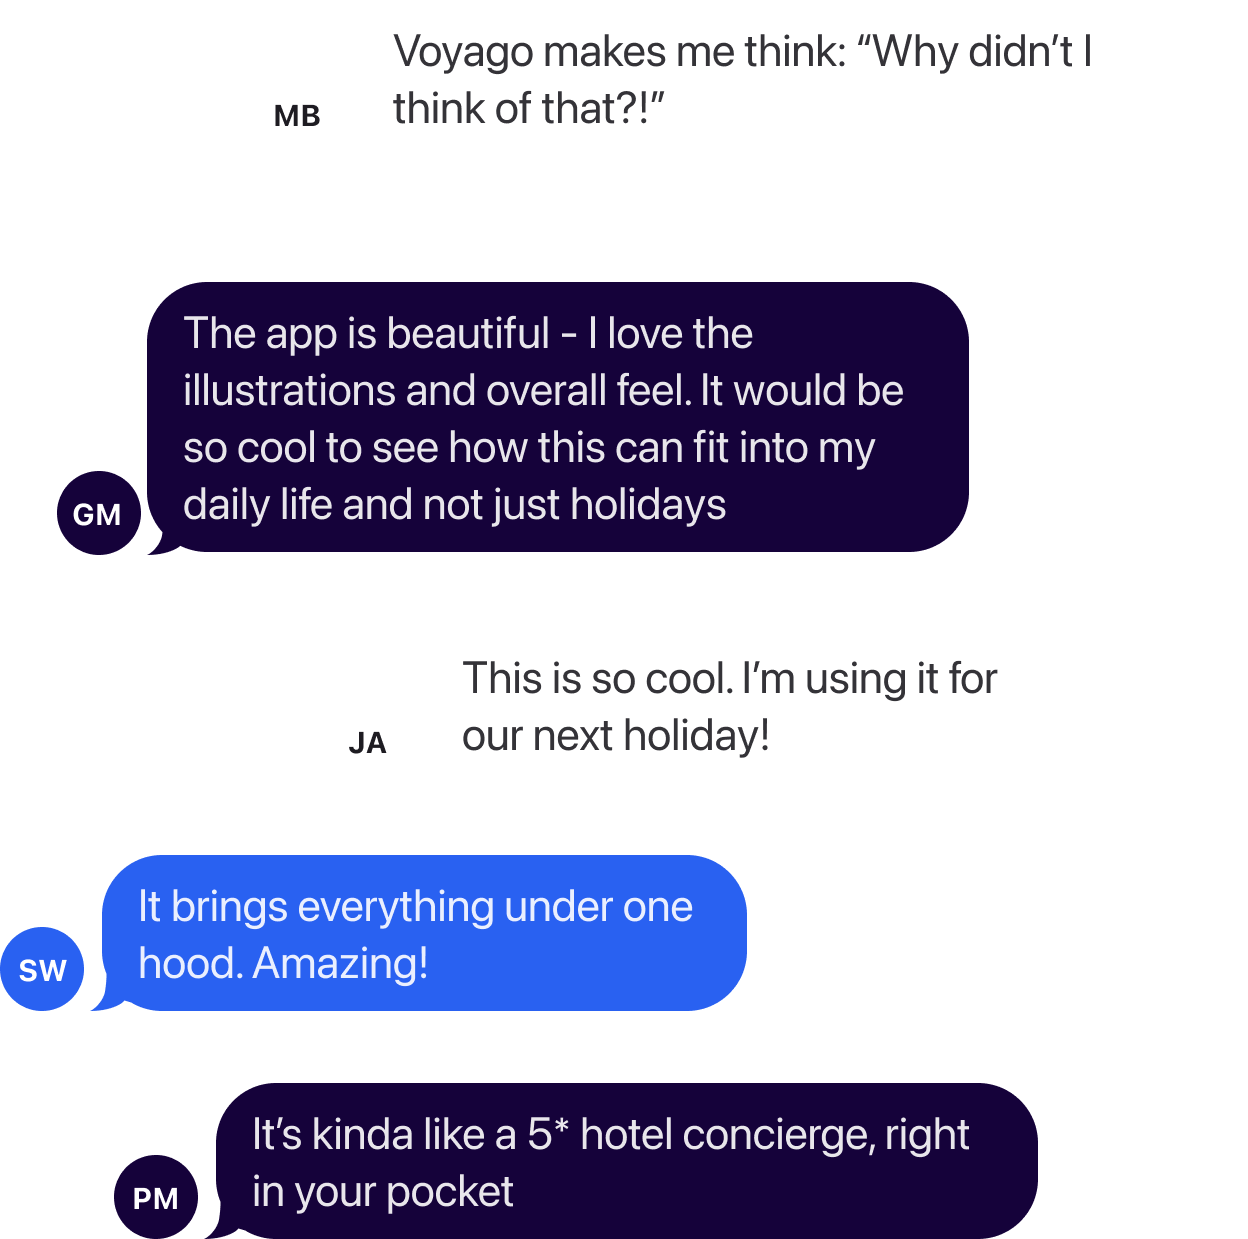 Recommendations from users of the Voyago app